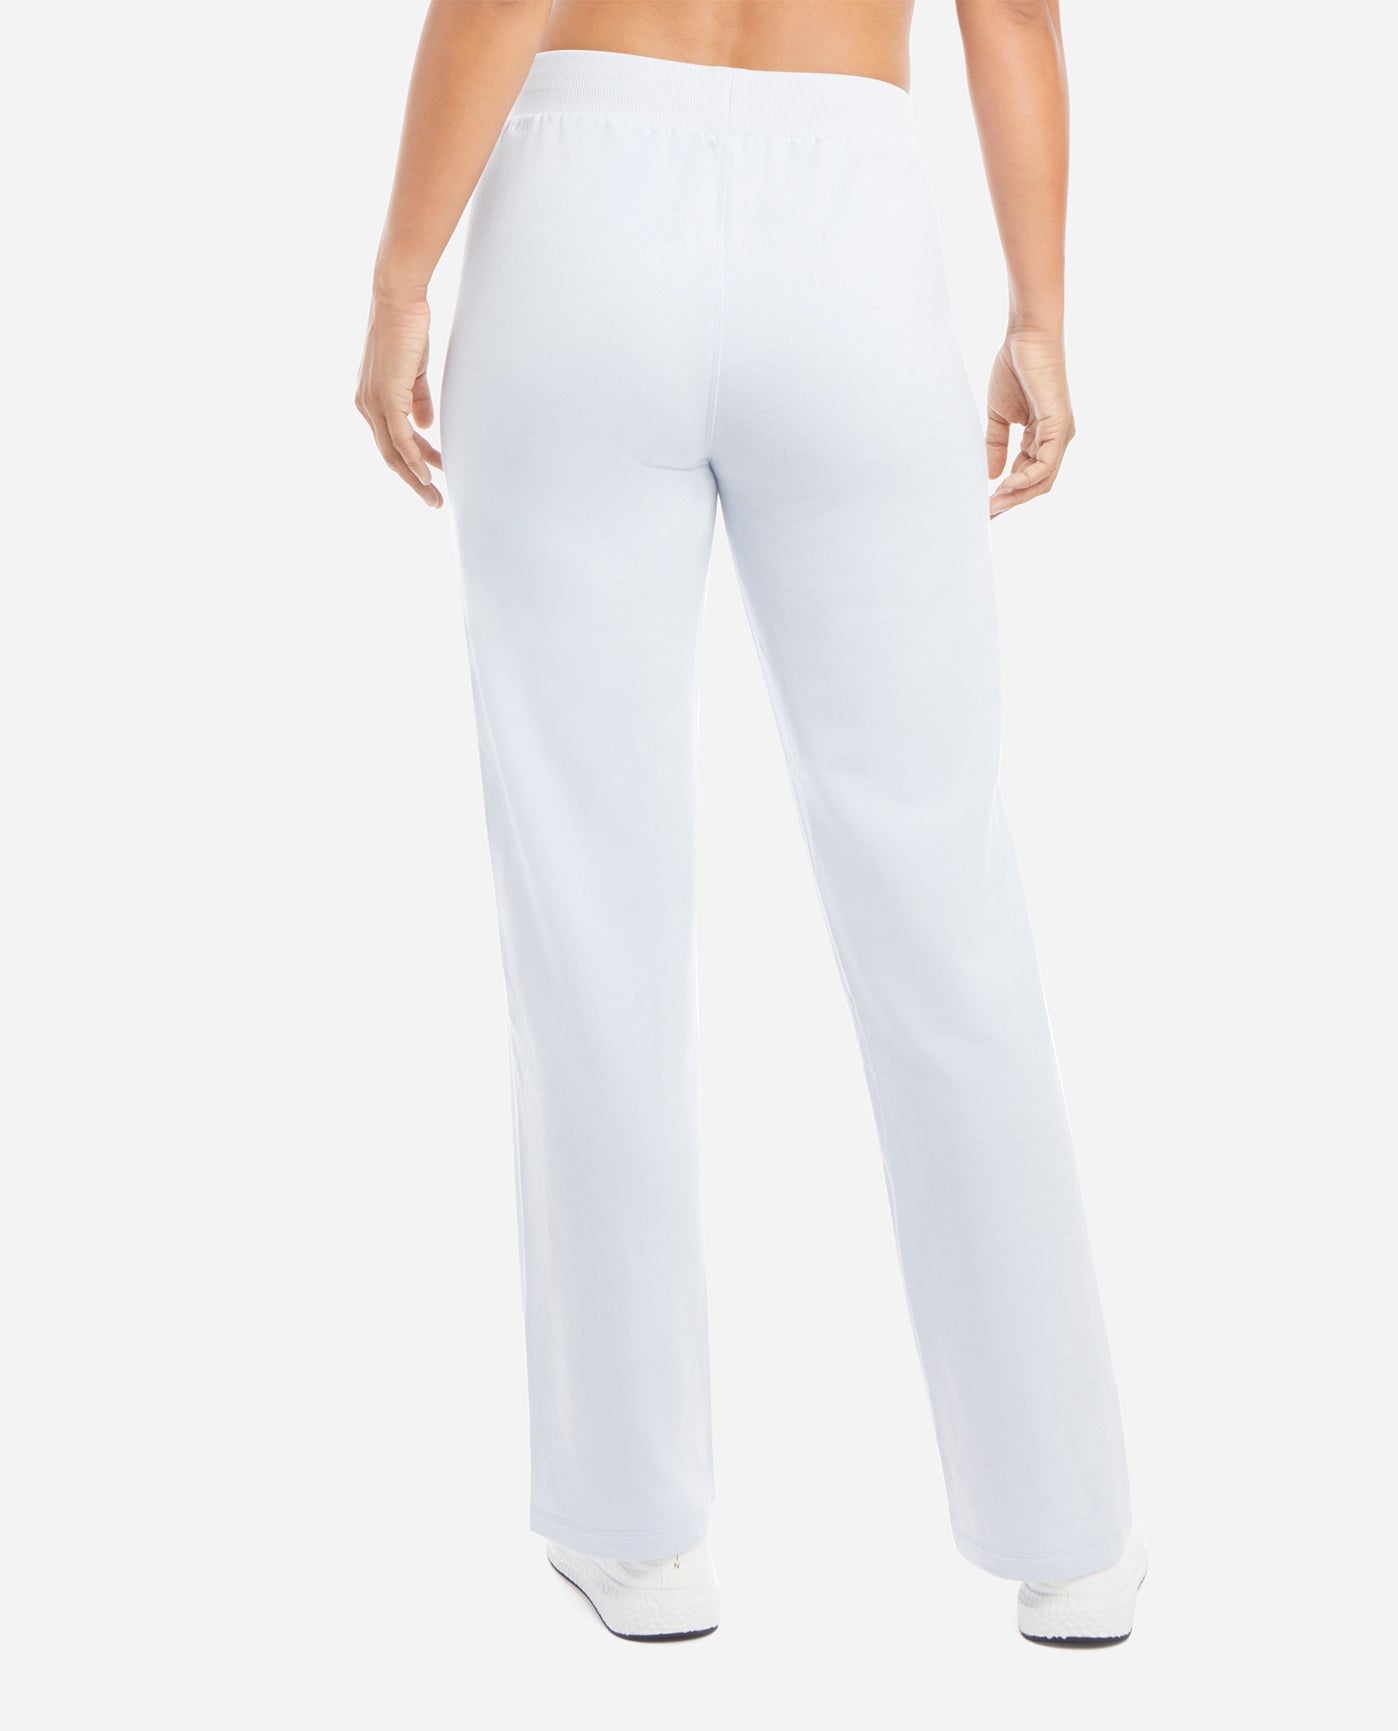 Danskin Now Womens Comfort Fit Pants with Drawstring available in